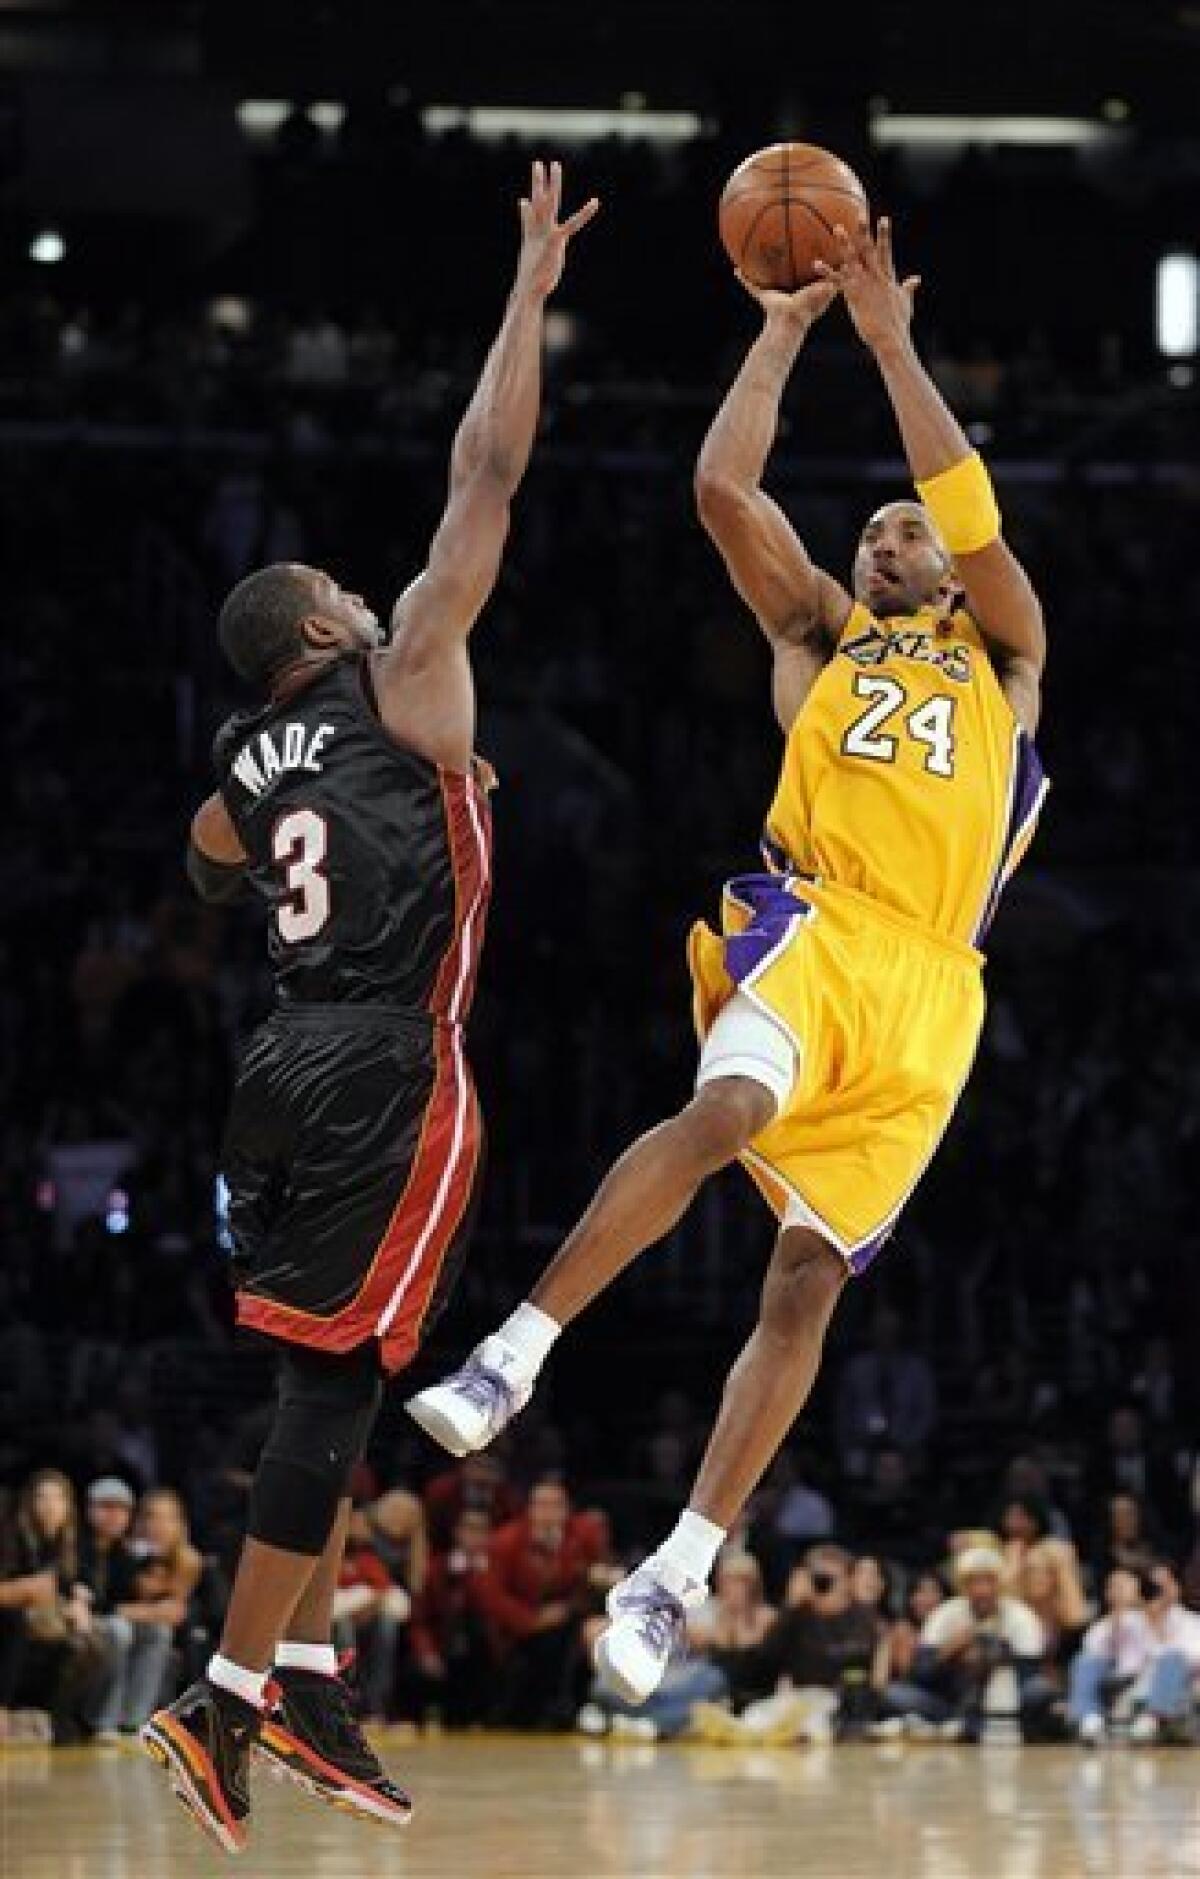 Los Angeles Lakers' Kobe Bryant drives to the basket past New